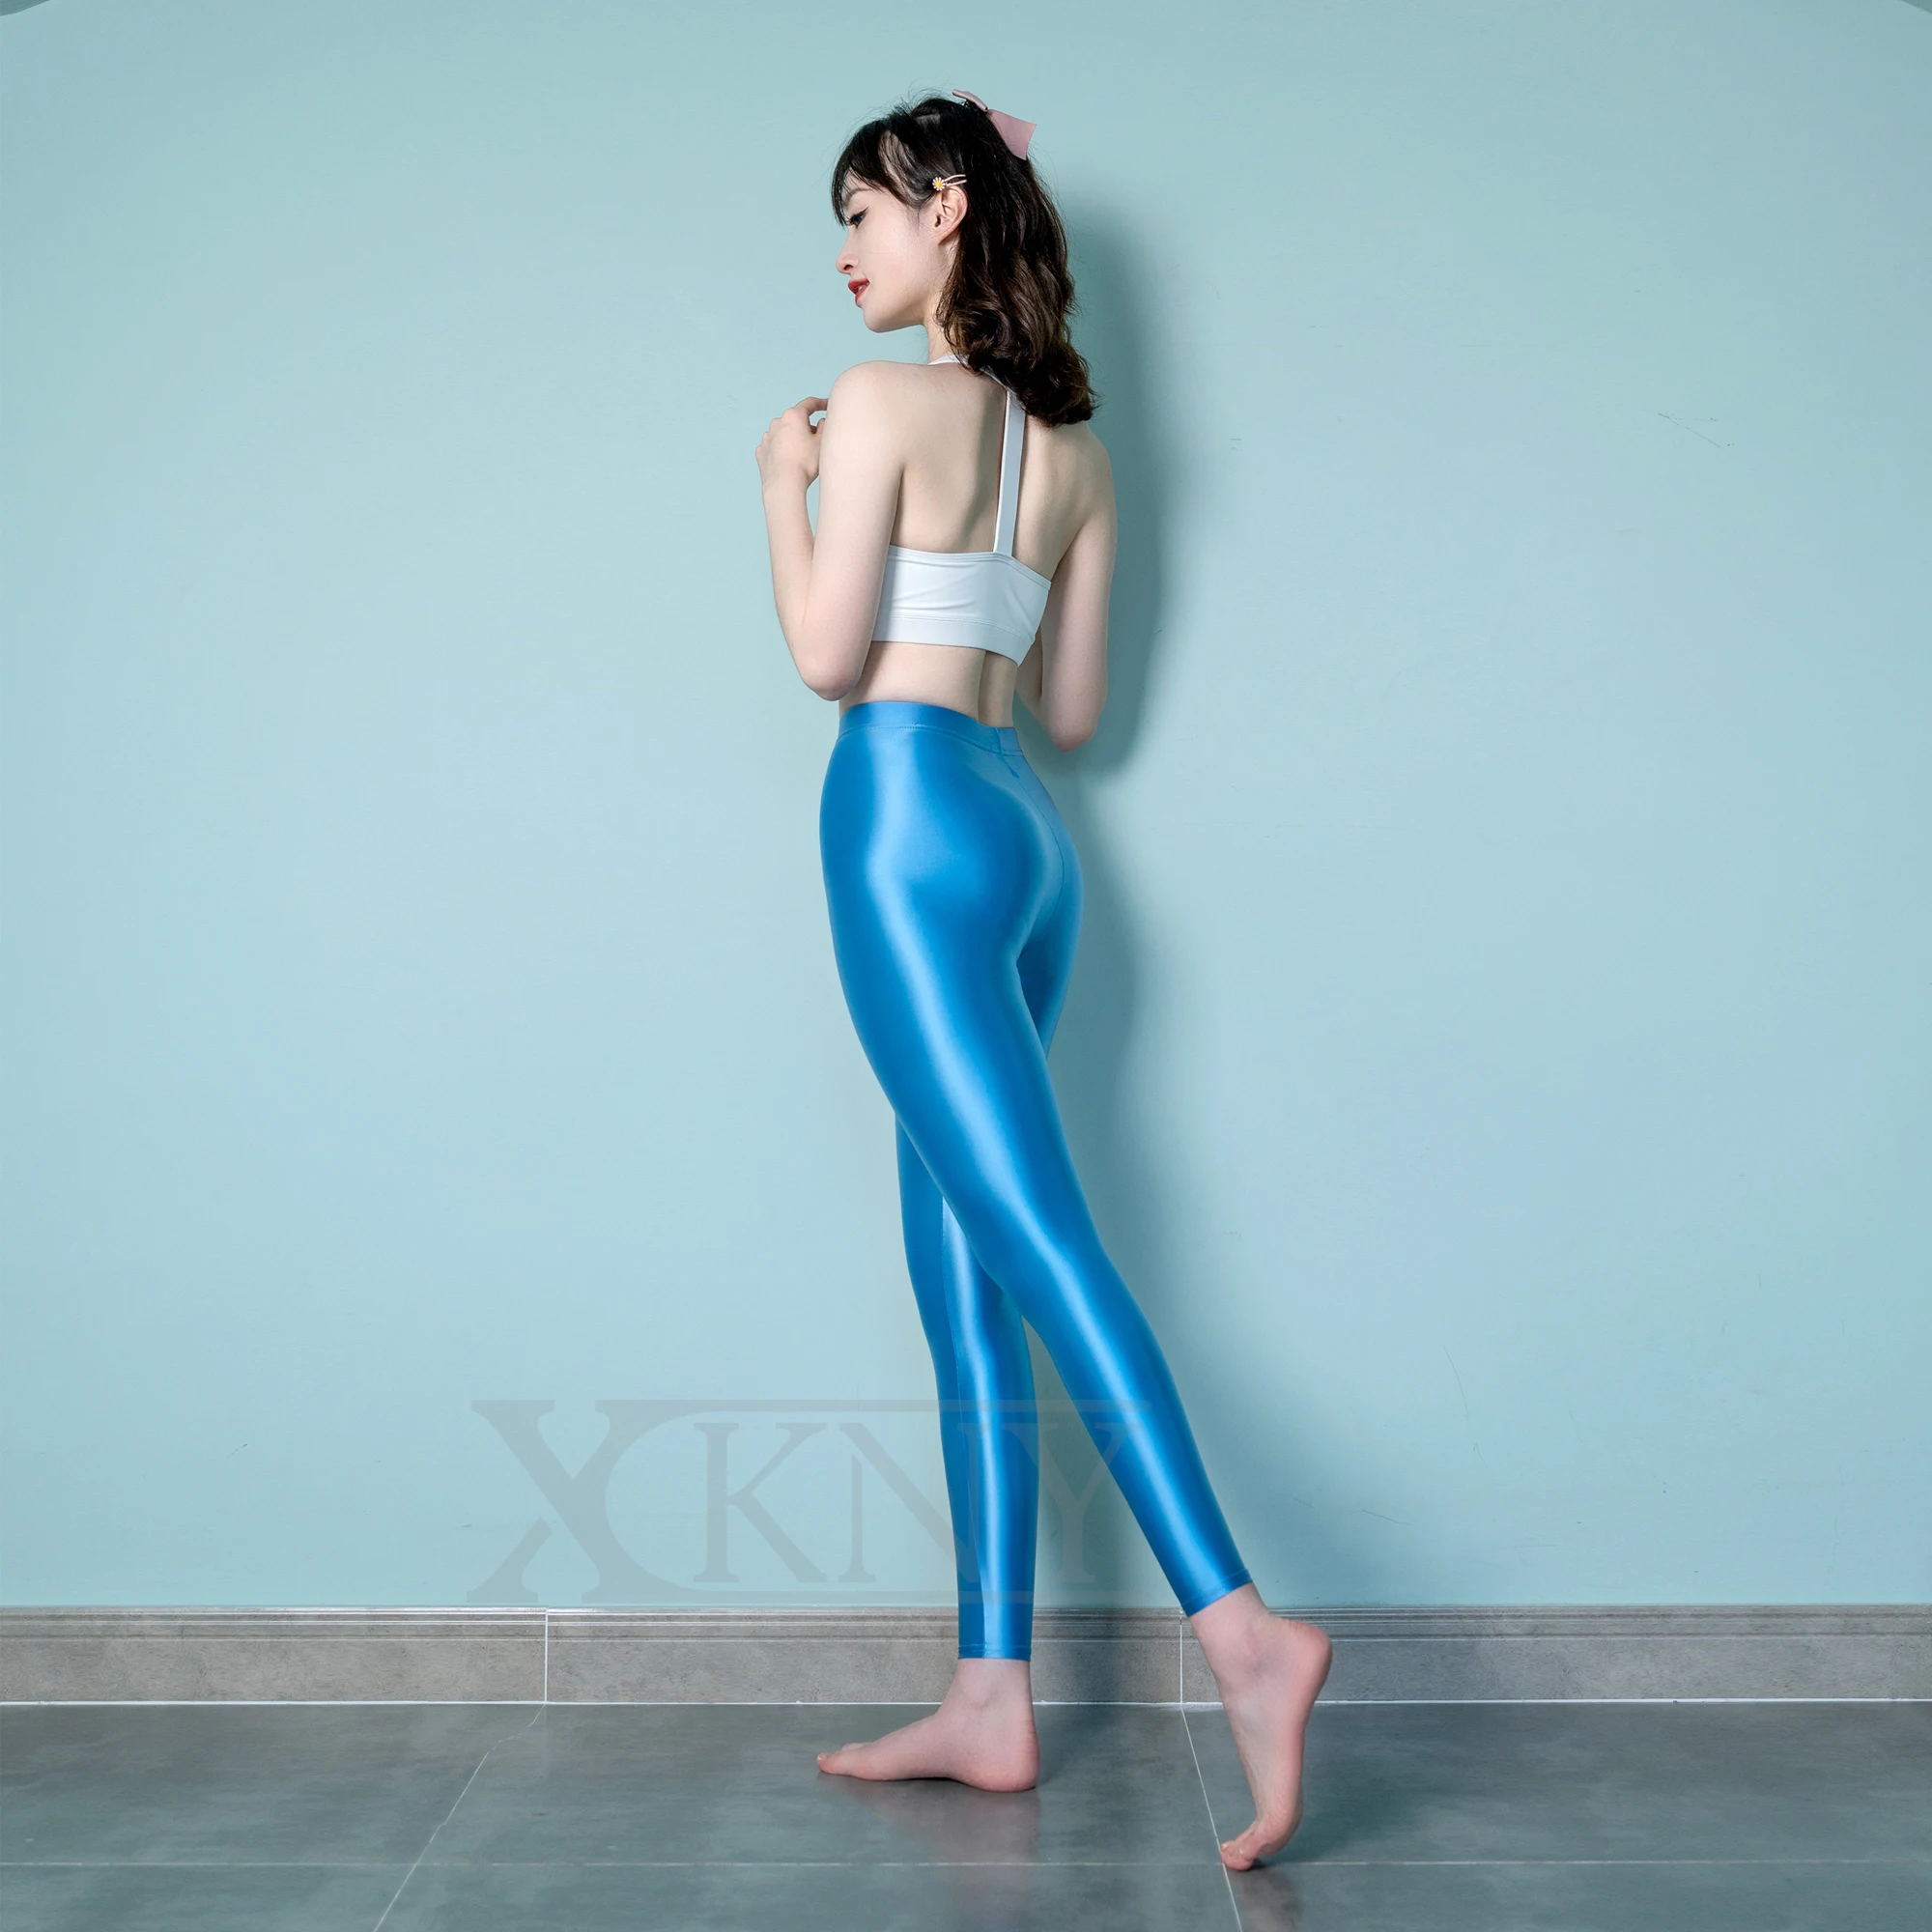 XCKNY Satin silk seamless front crotch opaque pantyhose shiny wet color  tight Leggings high Yoga swimming gloss pants